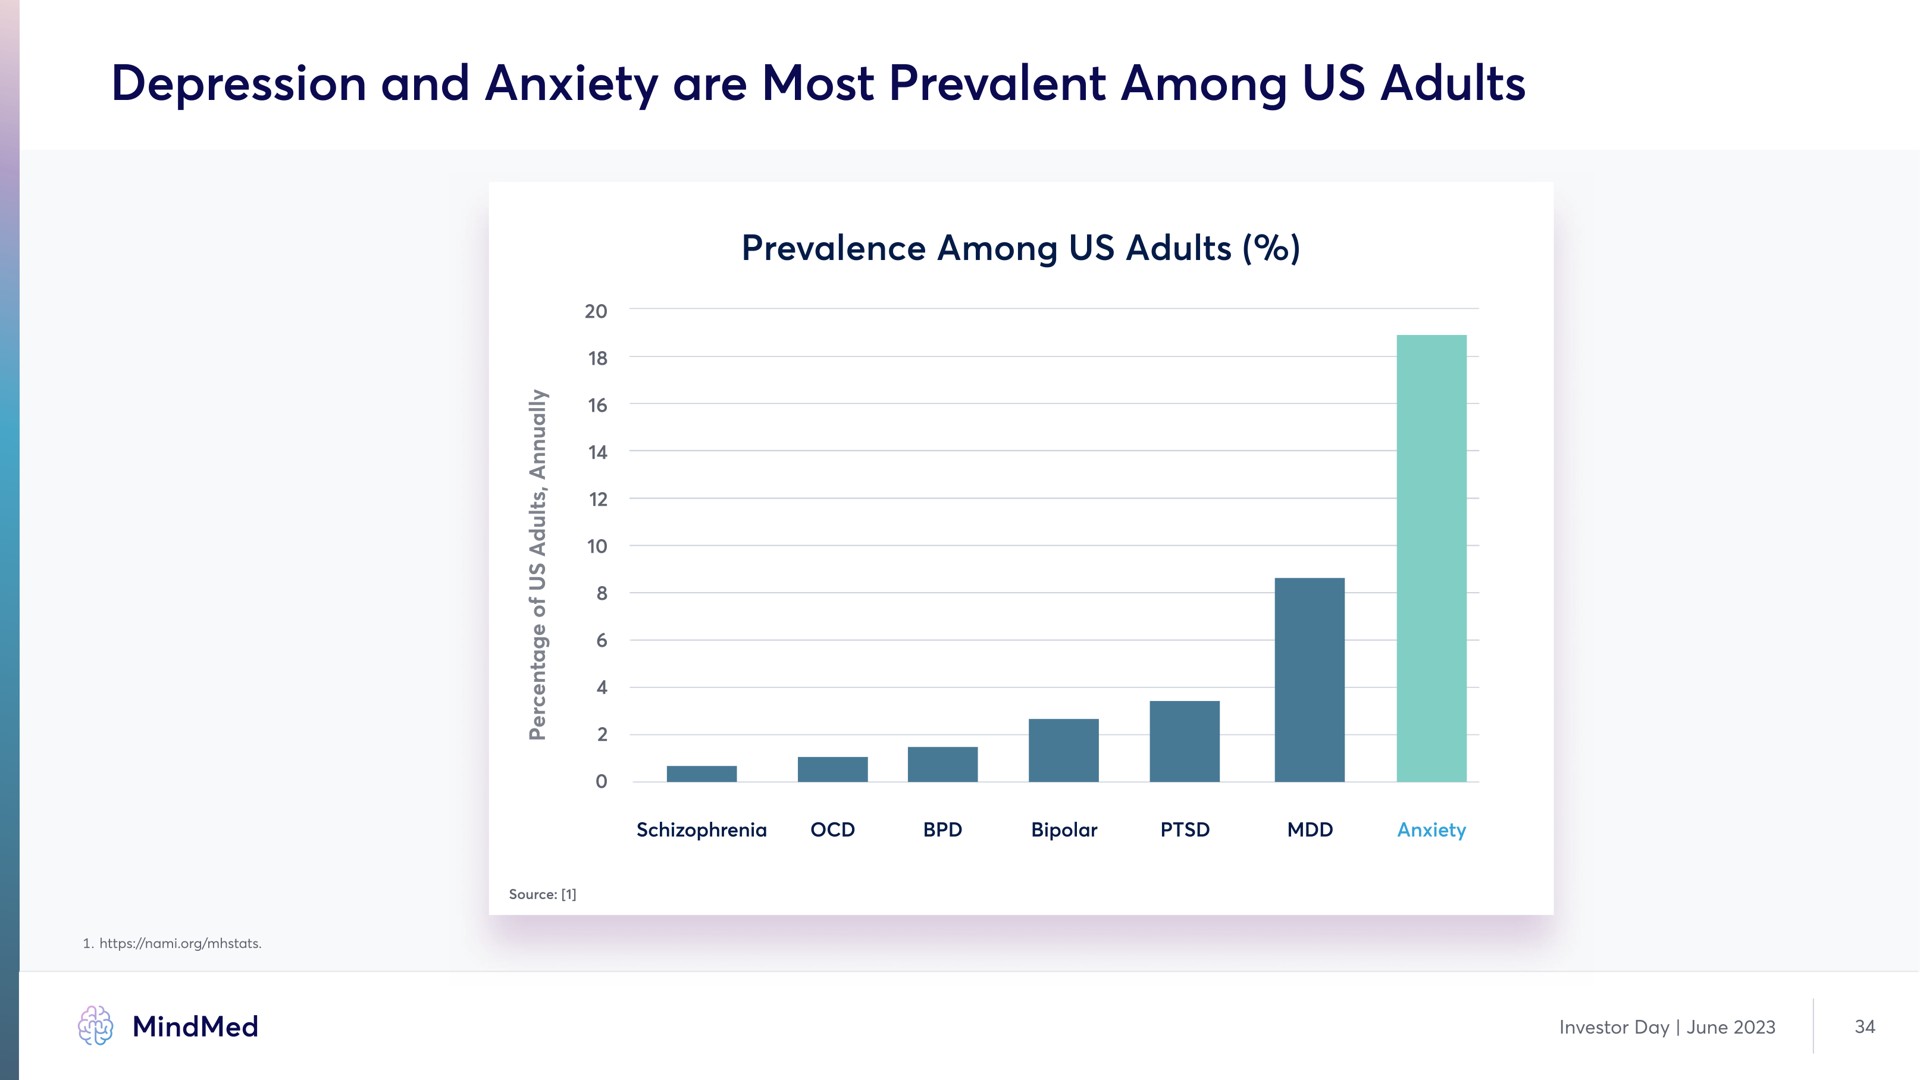 depression and anxiety are most prevalent among us adults | MindMed